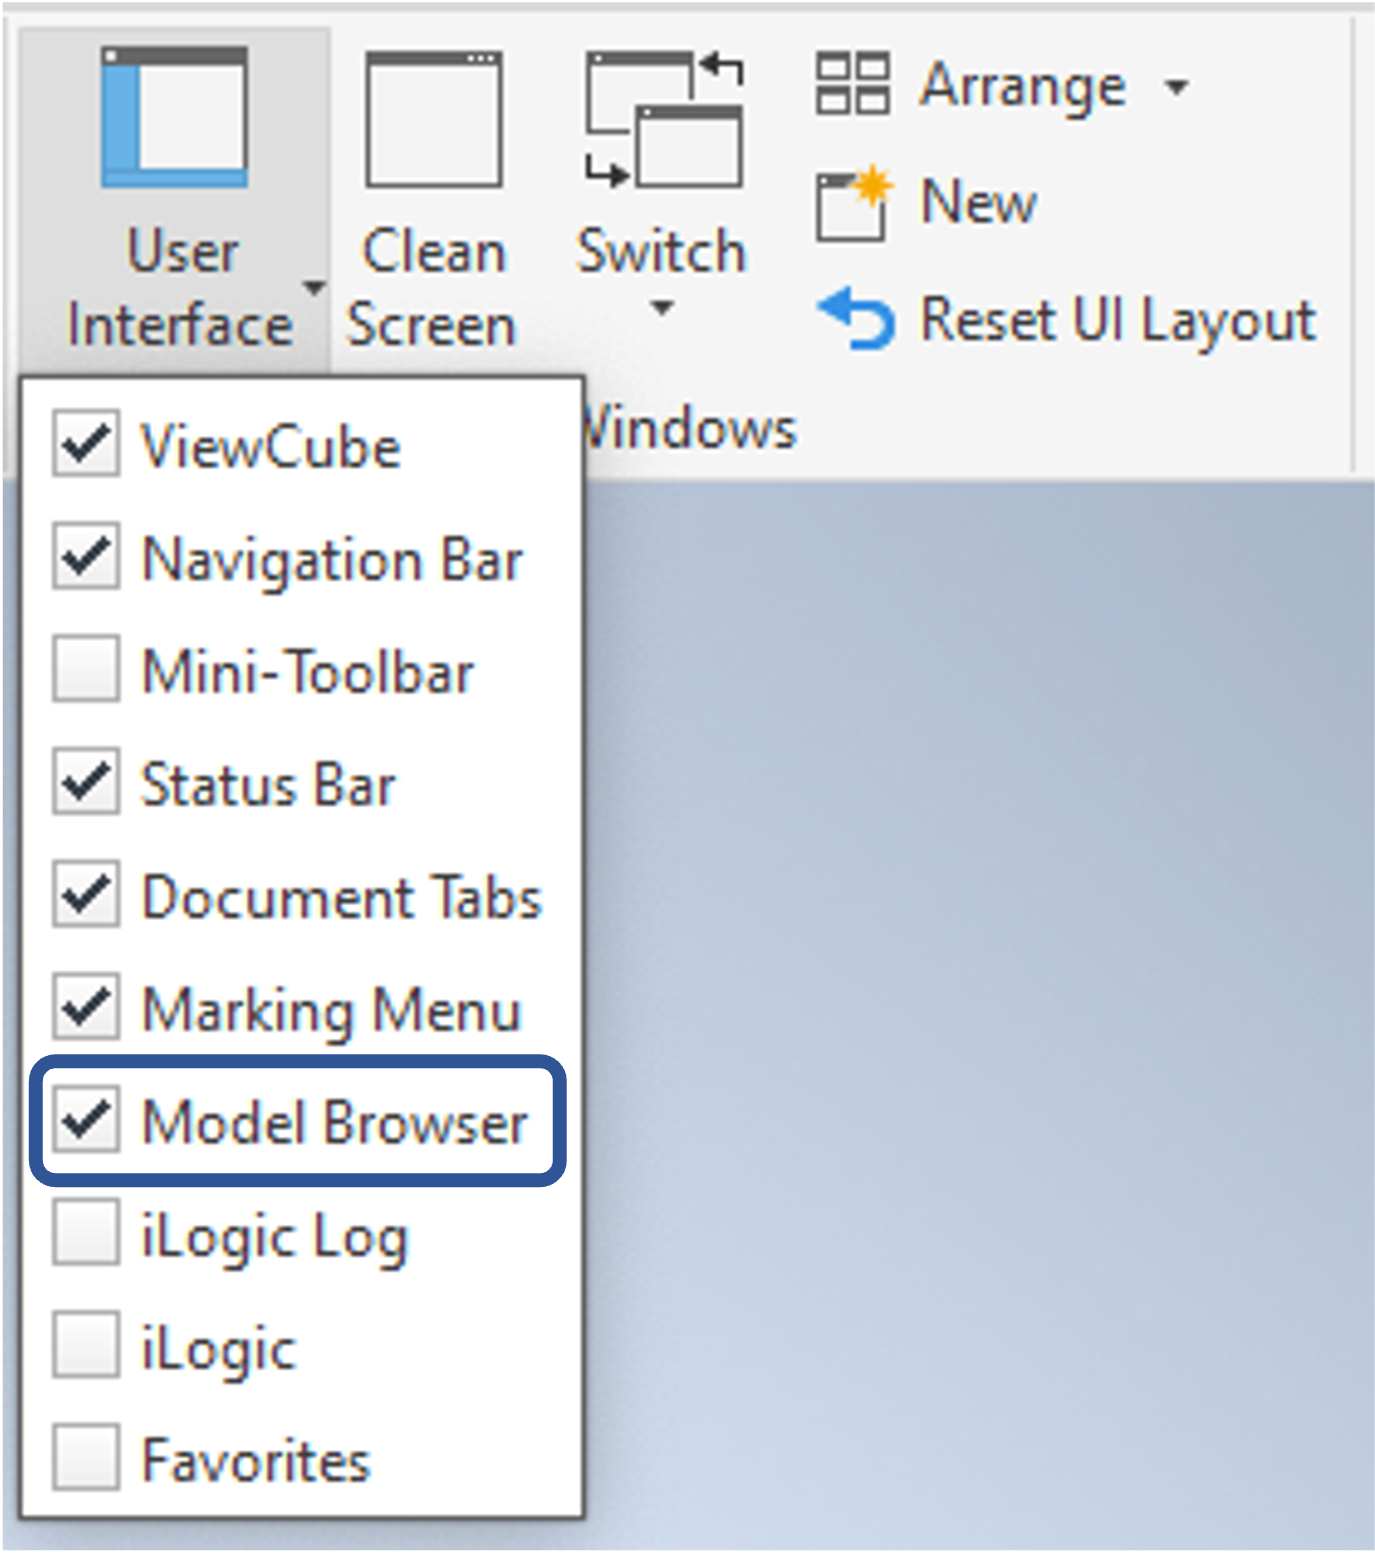 How to view the Model Browser.